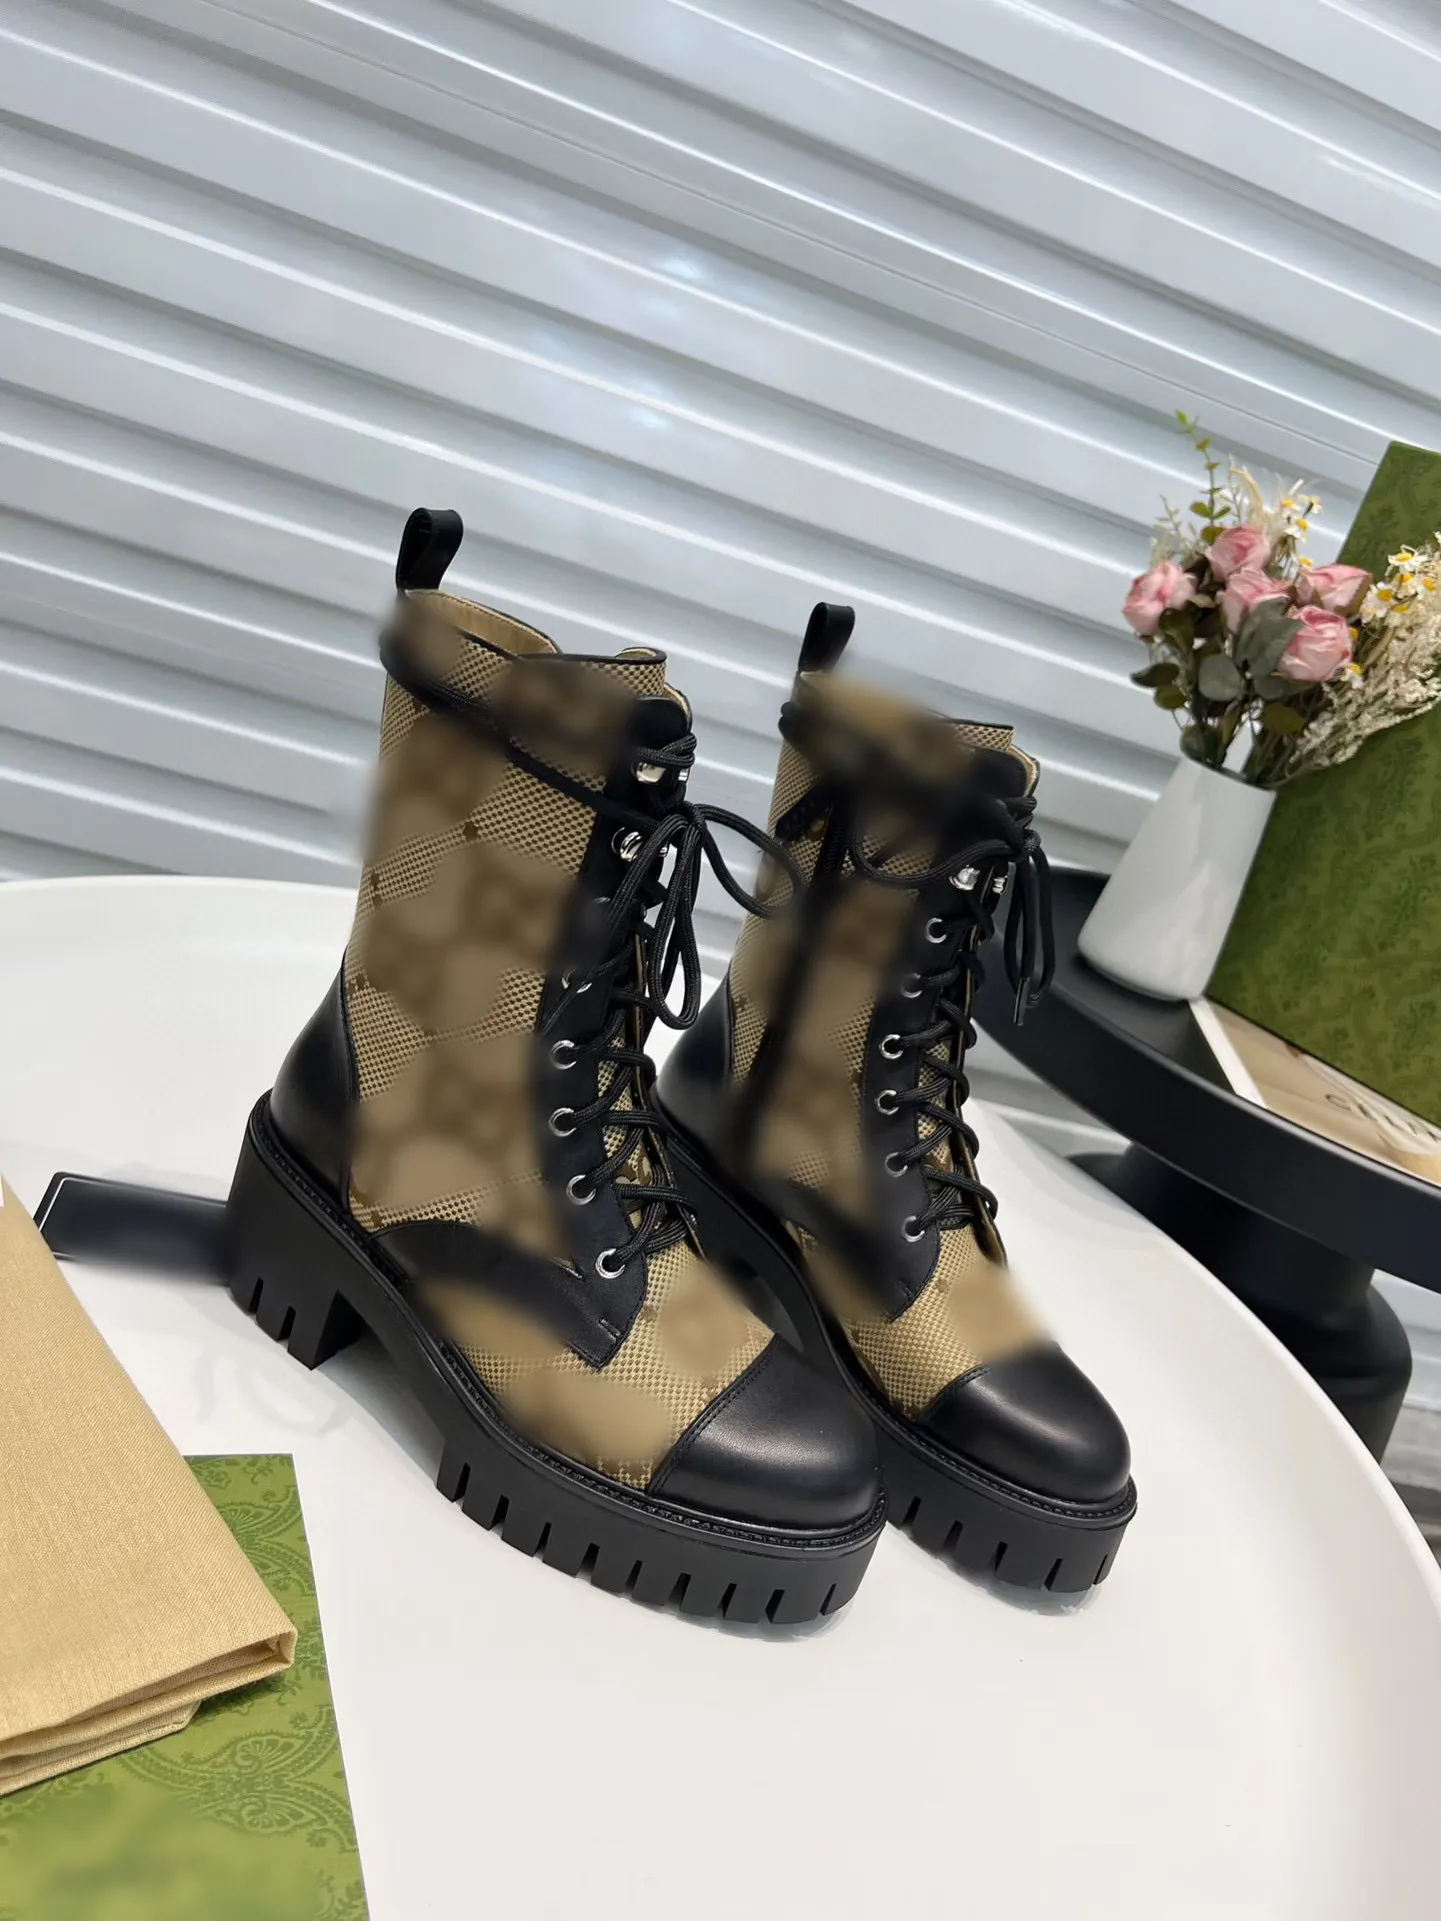 Fashion women designer boots thick sole g letter printed mid calf booties lace up platform black khaki luxury ultra women half boots